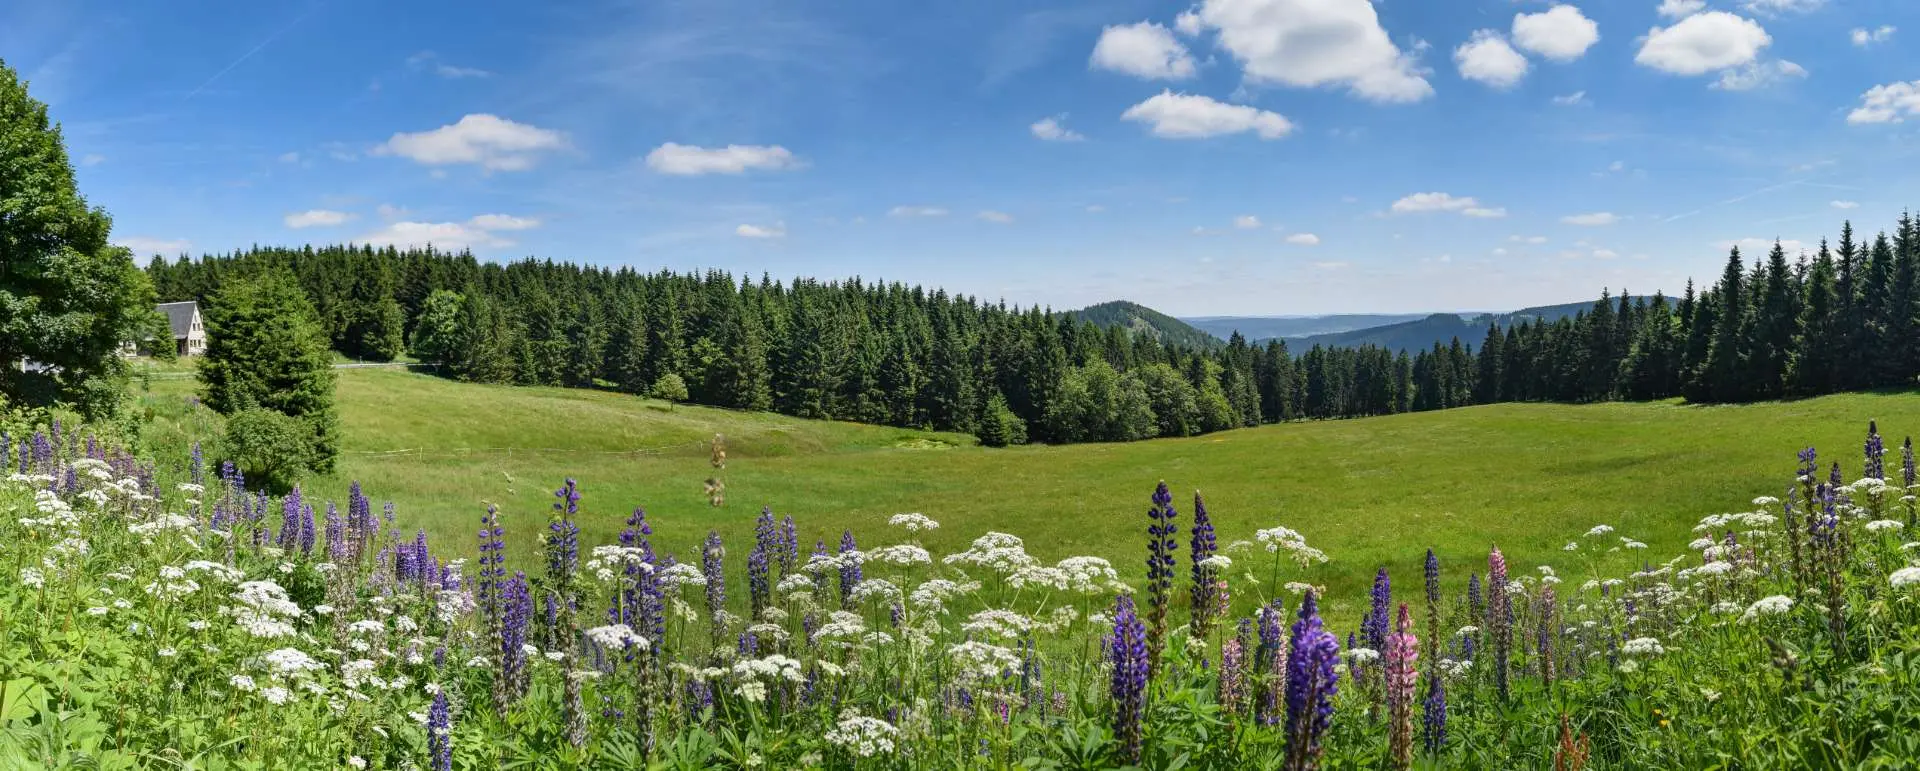 Thuringian Forest - the destination for groups